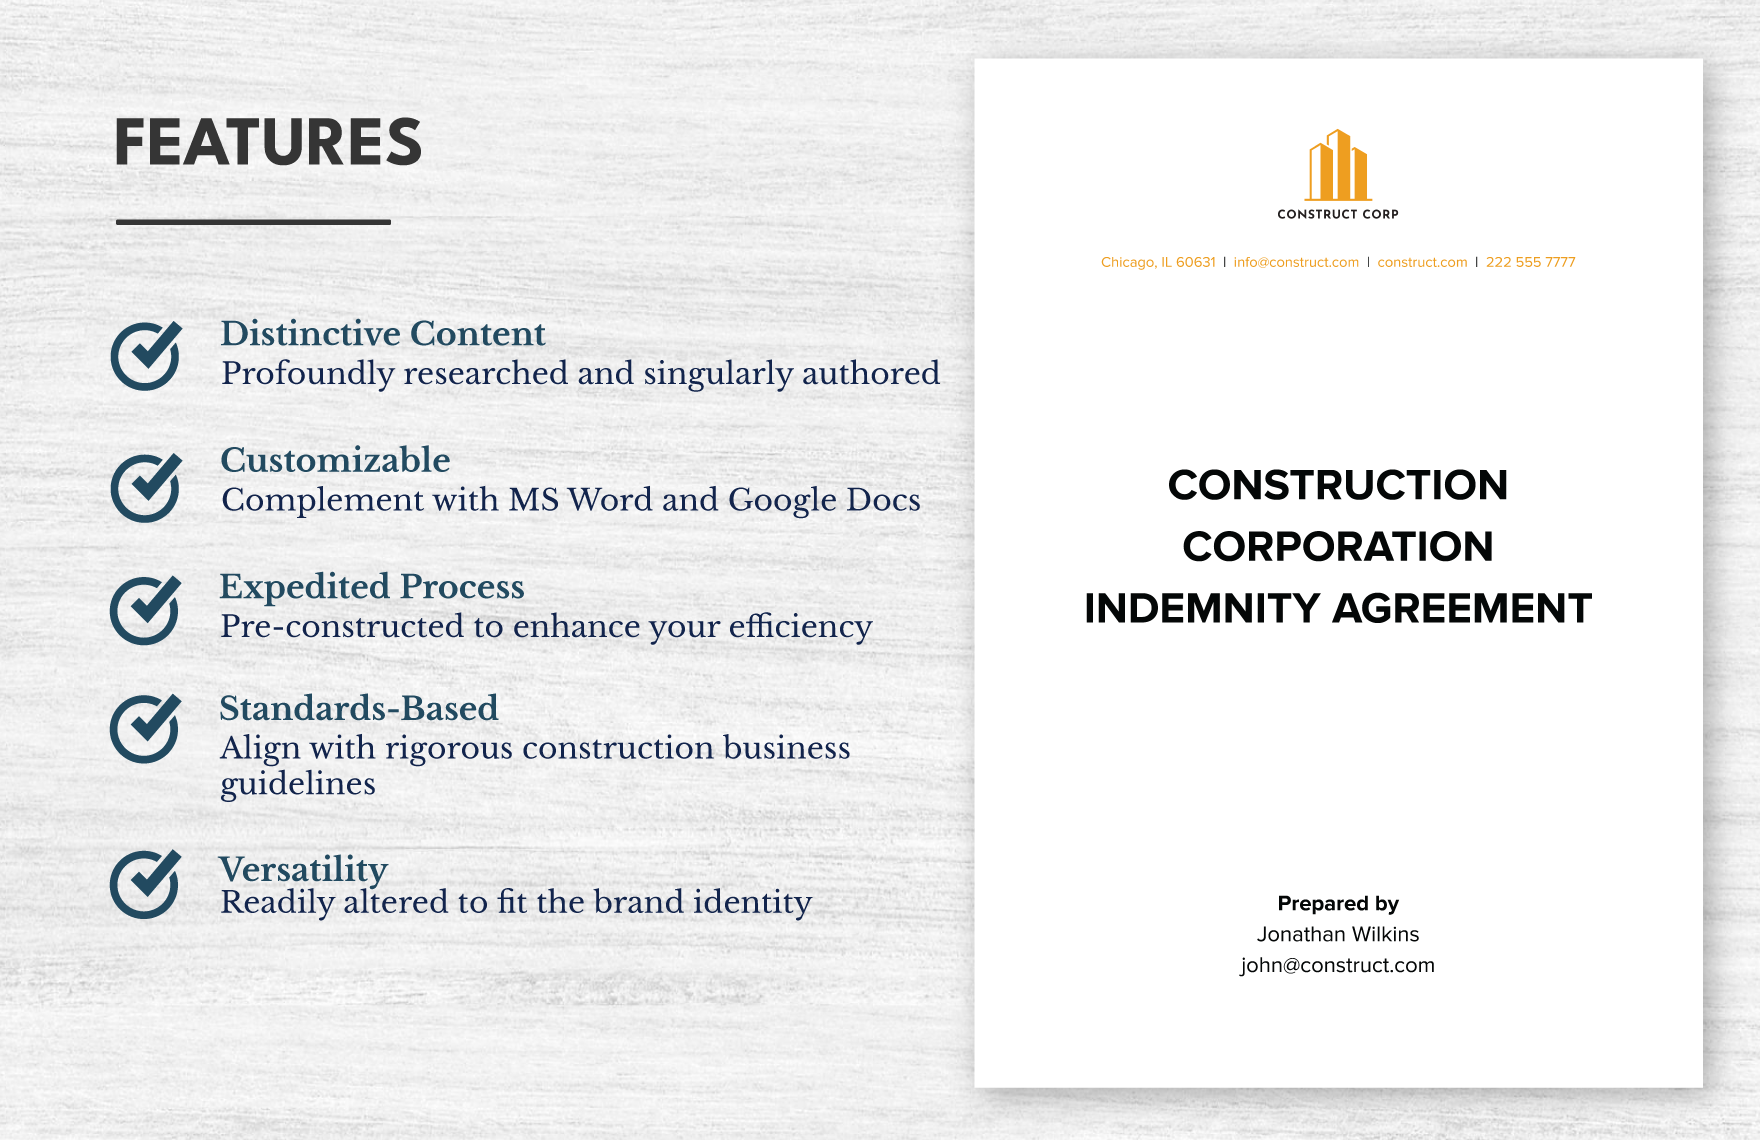 Construction Corporation Indemnity Agreement Template